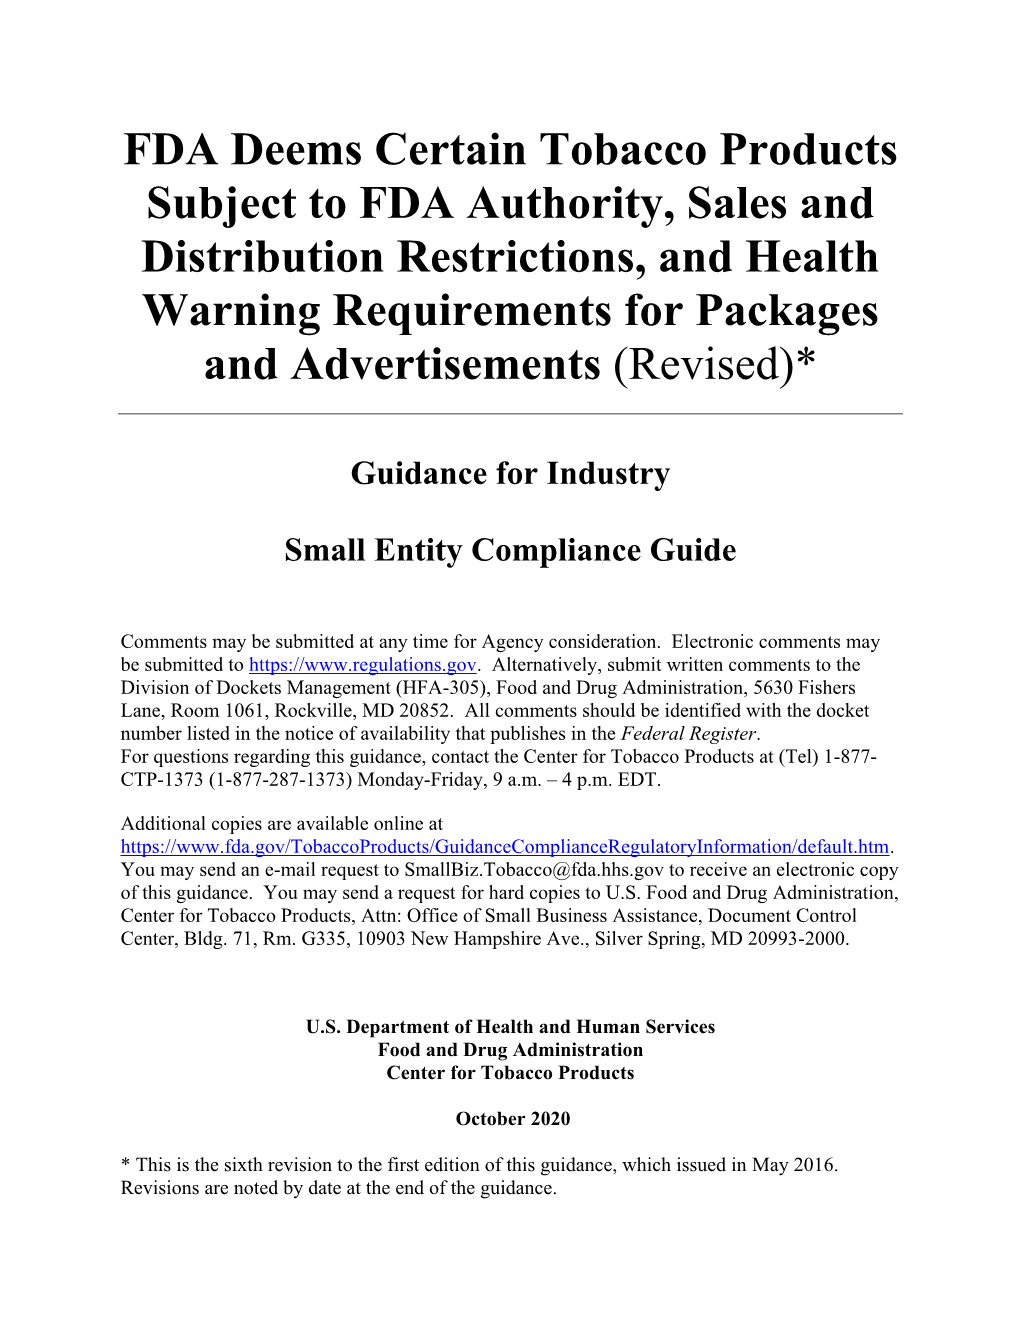 FDA Deems Certain Tobacco Products Subject to FDA Authority